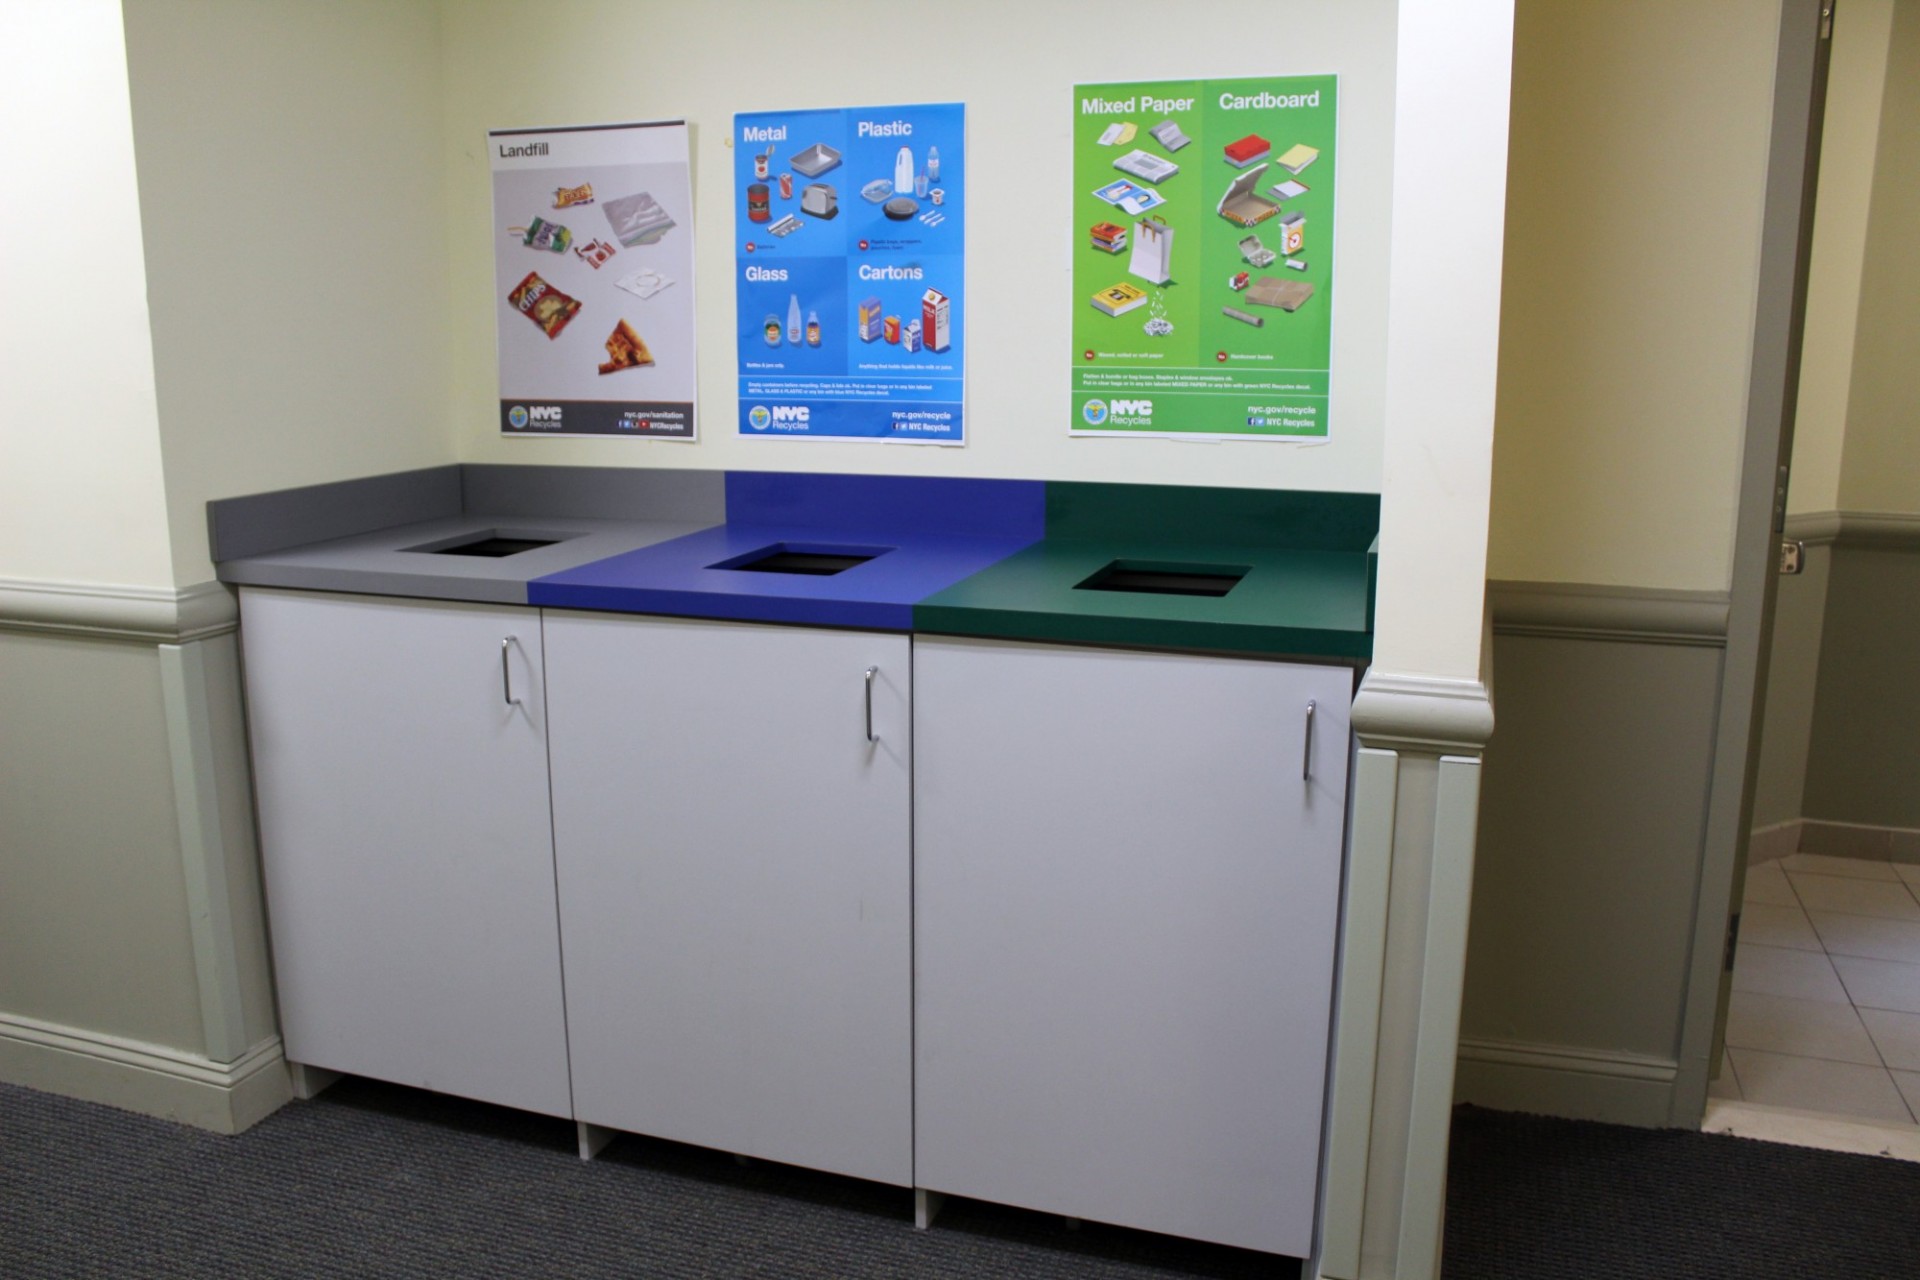 Recycling station in the residence halls with three bins